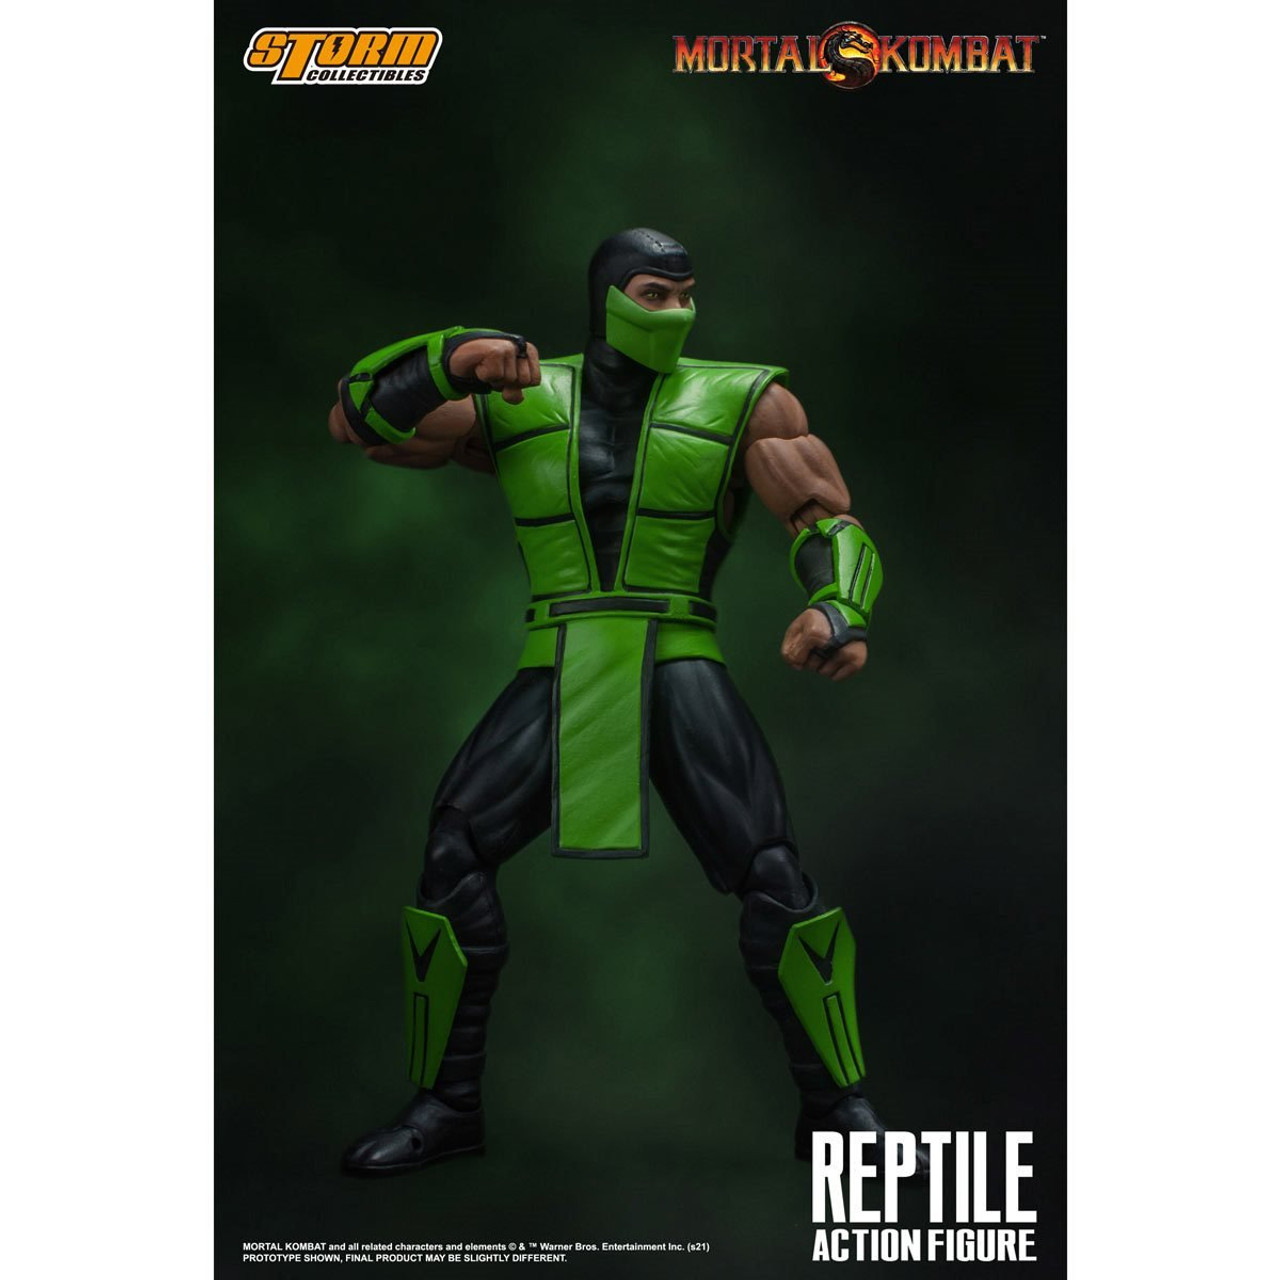 Mortal Kombat action figures - Another Toy Review by Michael